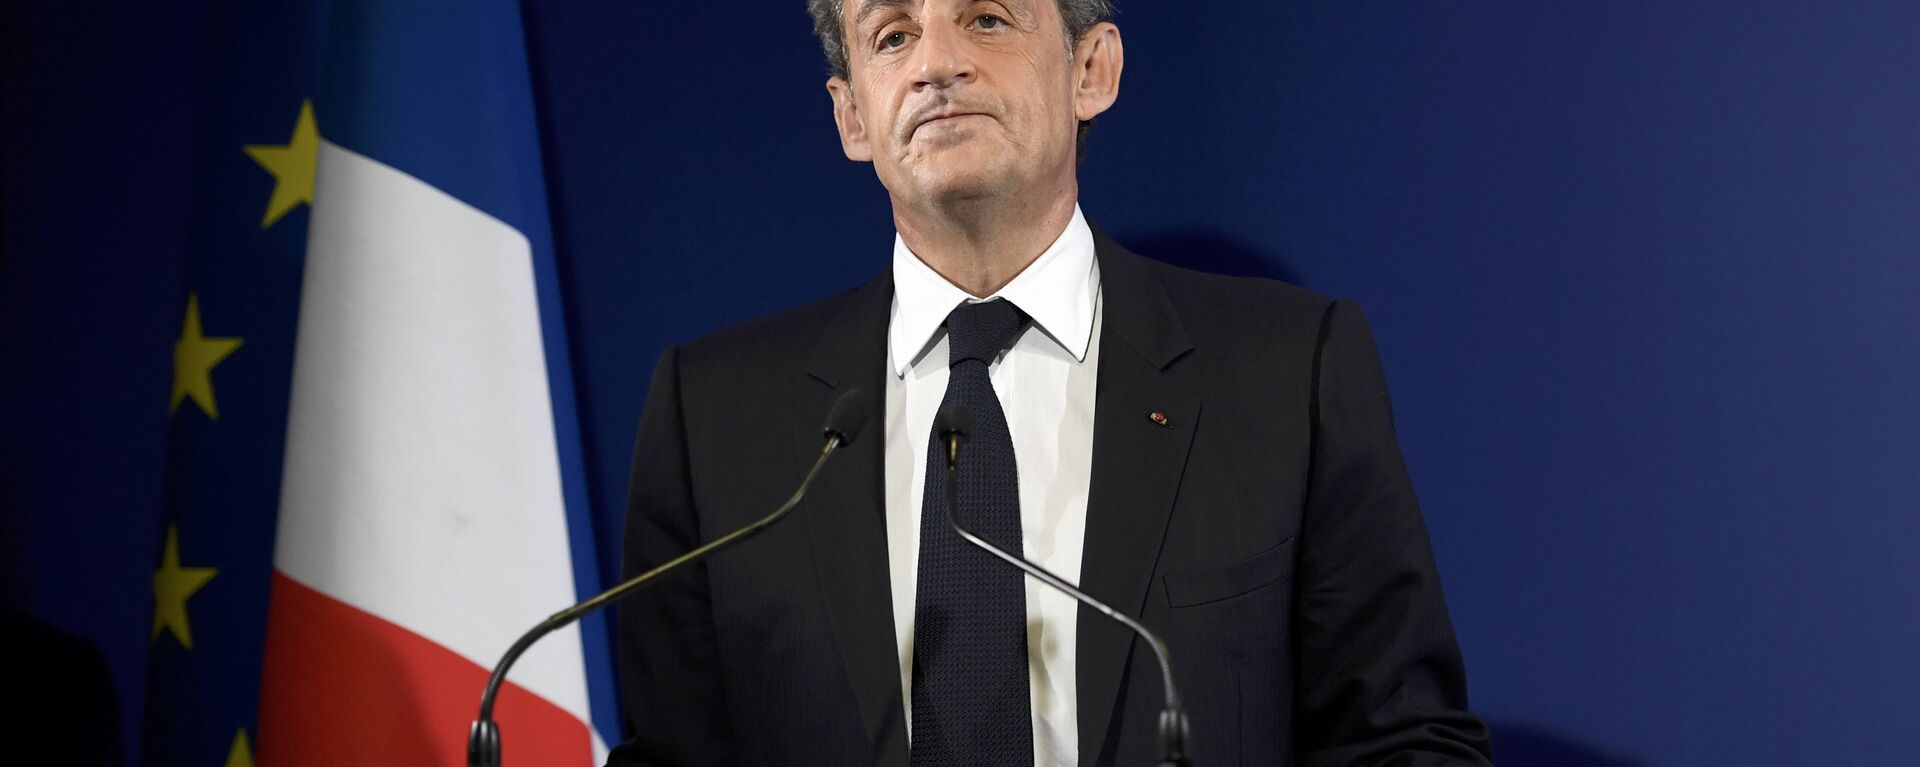 Nicolas Sarkozy, former French president and candidate for the French conservative presidential primary, reacts after partial results in the first round of the French center-right presidential primary election at his campaign headquarters in Paris, France, November 20, 2016. - Sputnik International, 1920, 23.11.2020